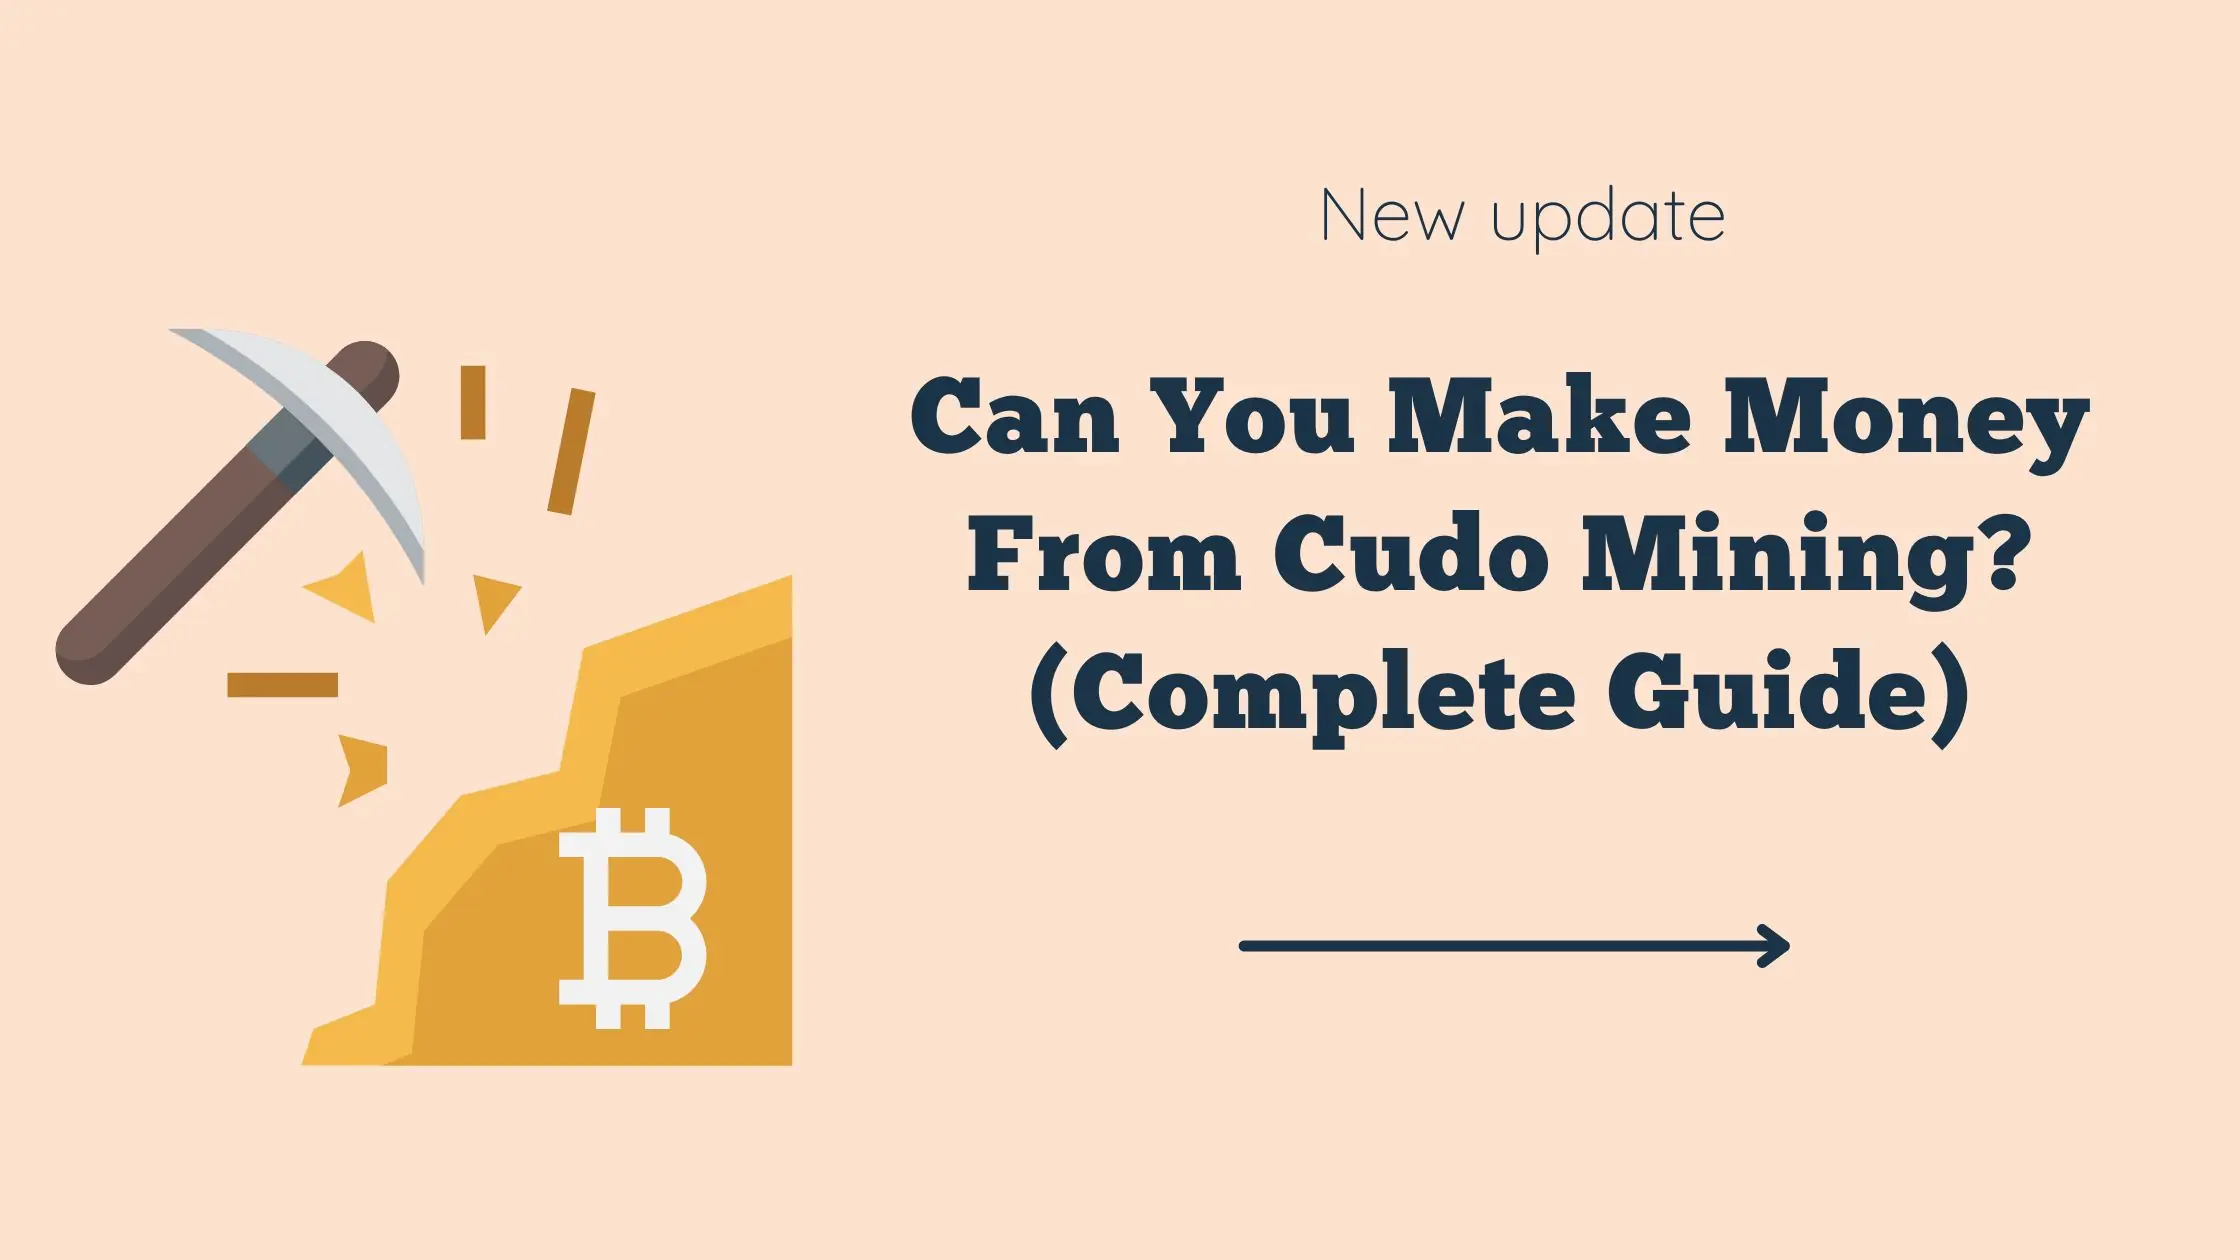 Can You Make Money From Cudo Mining? (Complete Guide)